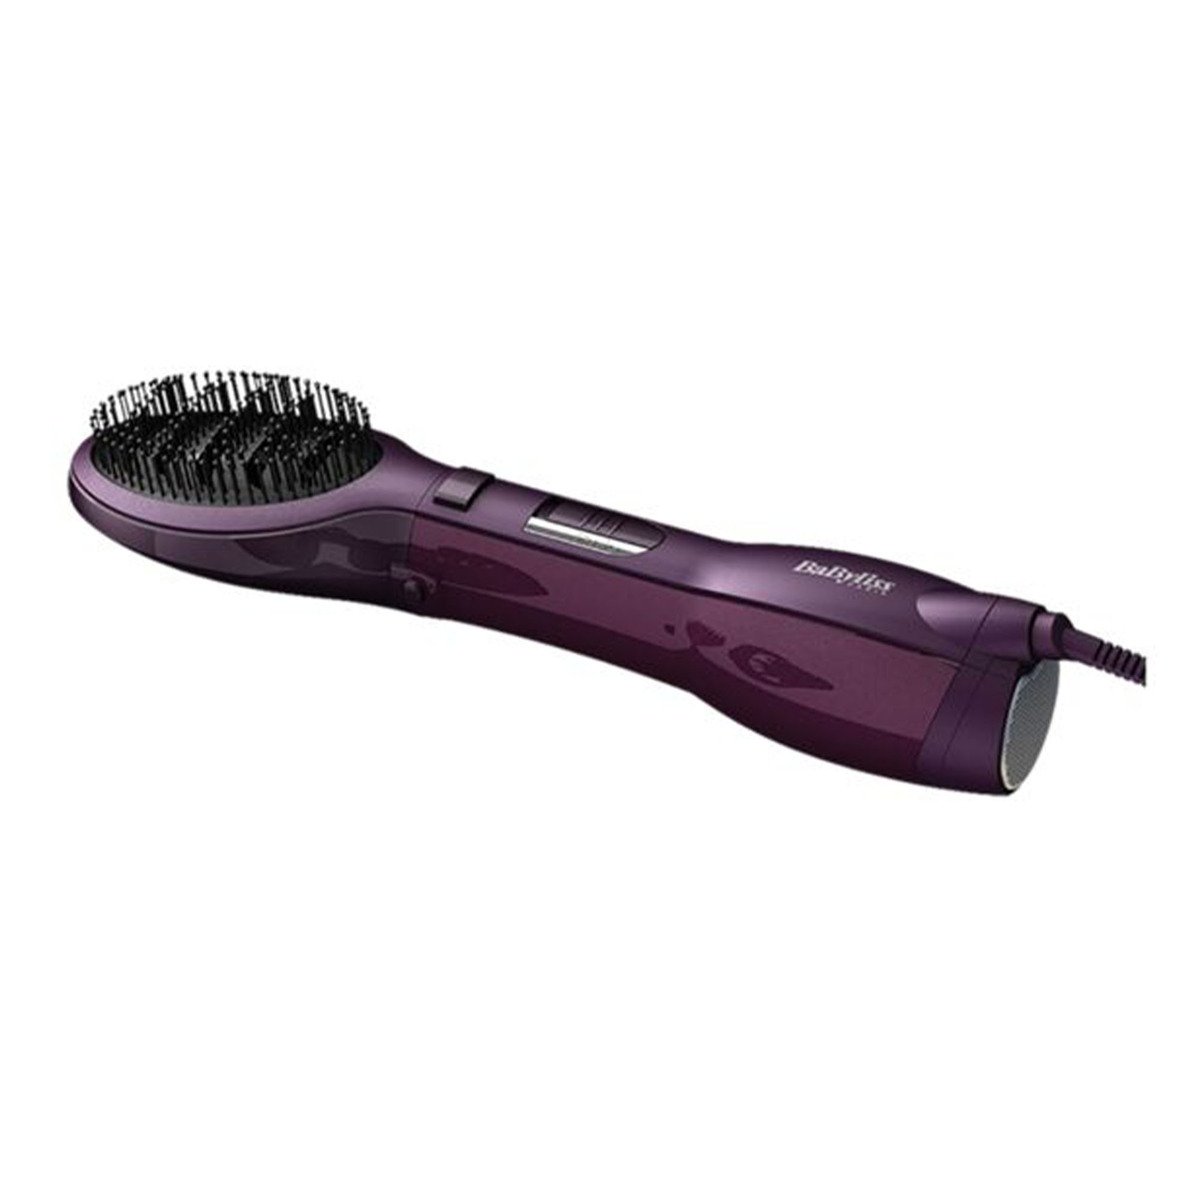 Babyliss 1000 Watts Airstylers The Puddle Air Brush Hair Styler AS115PSDE